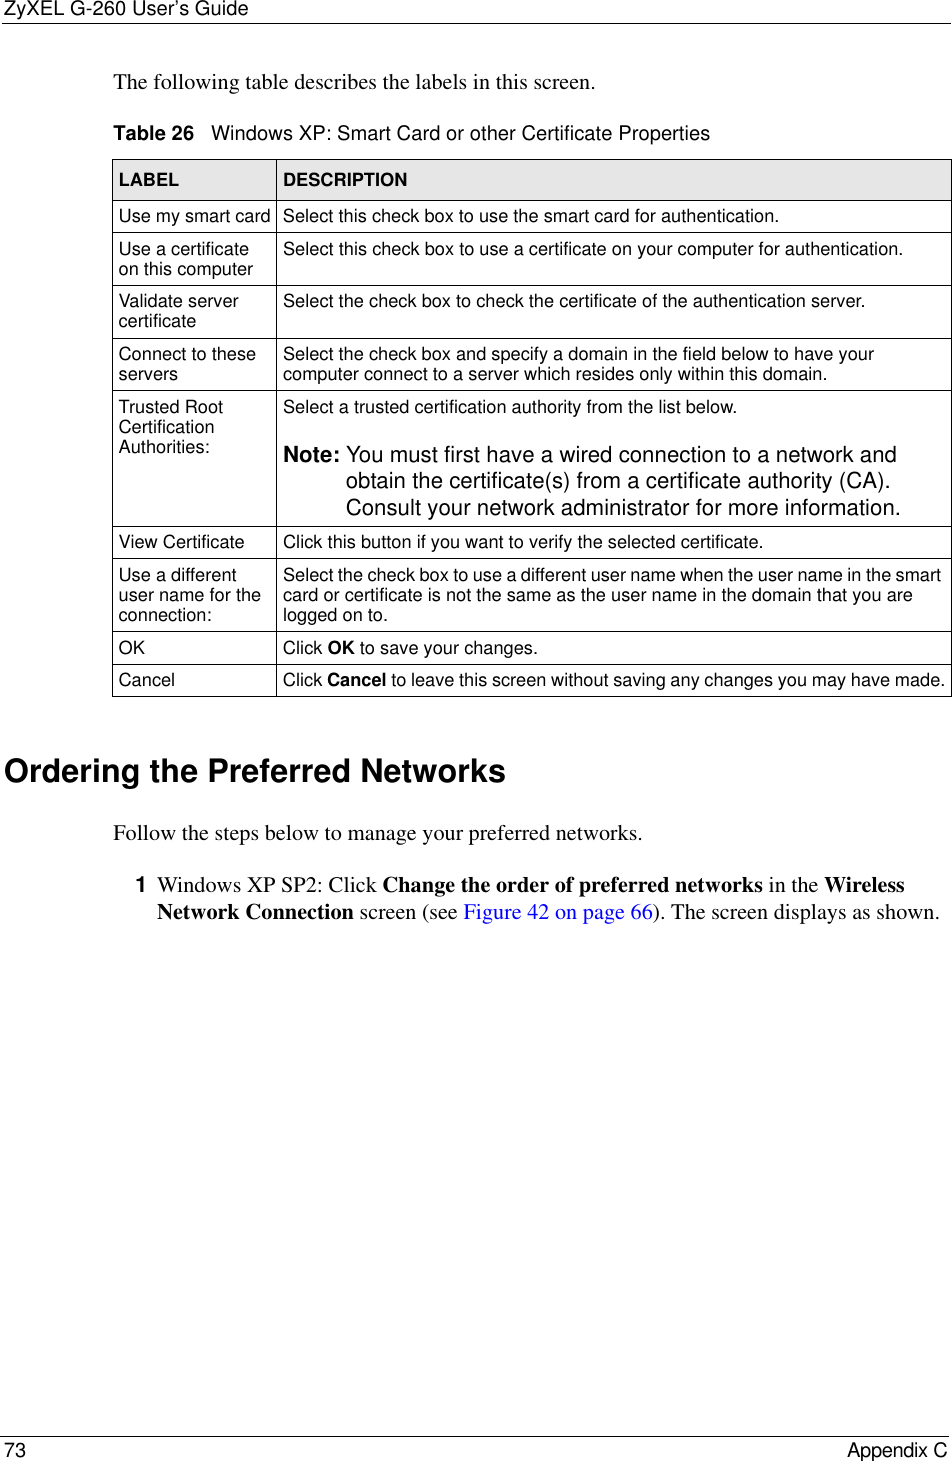 ZyXEL G-260 User’s Guide73 Appendix CThe following table describes the labels in this screen.Ordering the Preferred NetworksFollow the steps below to manage your preferred networks.1Windows XP SP2: Click Change the order of preferred networks in the Wireless Network Connection screen (see Figure 42 on page 66). The screen displays as shown. Table 26   Windows XP: Smart Card or other Certificate PropertiesLABEL DESCRIPTIONUse my smart card Select this check box to use the smart card for authentication.Use a certificate on this computer Select this check box to use a certificate on your computer for authentication.Validate server certificate Select the check box to check the certificate of the authentication server.Connect to these servers Select the check box and specify a domain in the field below to have your computer connect to a server which resides only within this domain. Trusted Root Certification Authorities:Select a trusted certification authority from the list below.Note: You must first have a wired connection to a network and obtain the certificate(s) from a certificate authority (CA). Consult your network administrator for more information.View Certificate Click this button if you want to verify the selected certificate.Use a different user name for the connection:Select the check box to use a different user name when the user name in the smart card or certificate is not the same as the user name in the domain that you are logged on to.OK Click OK to save your changes.Cancel Click Cancel to leave this screen without saving any changes you may have made.